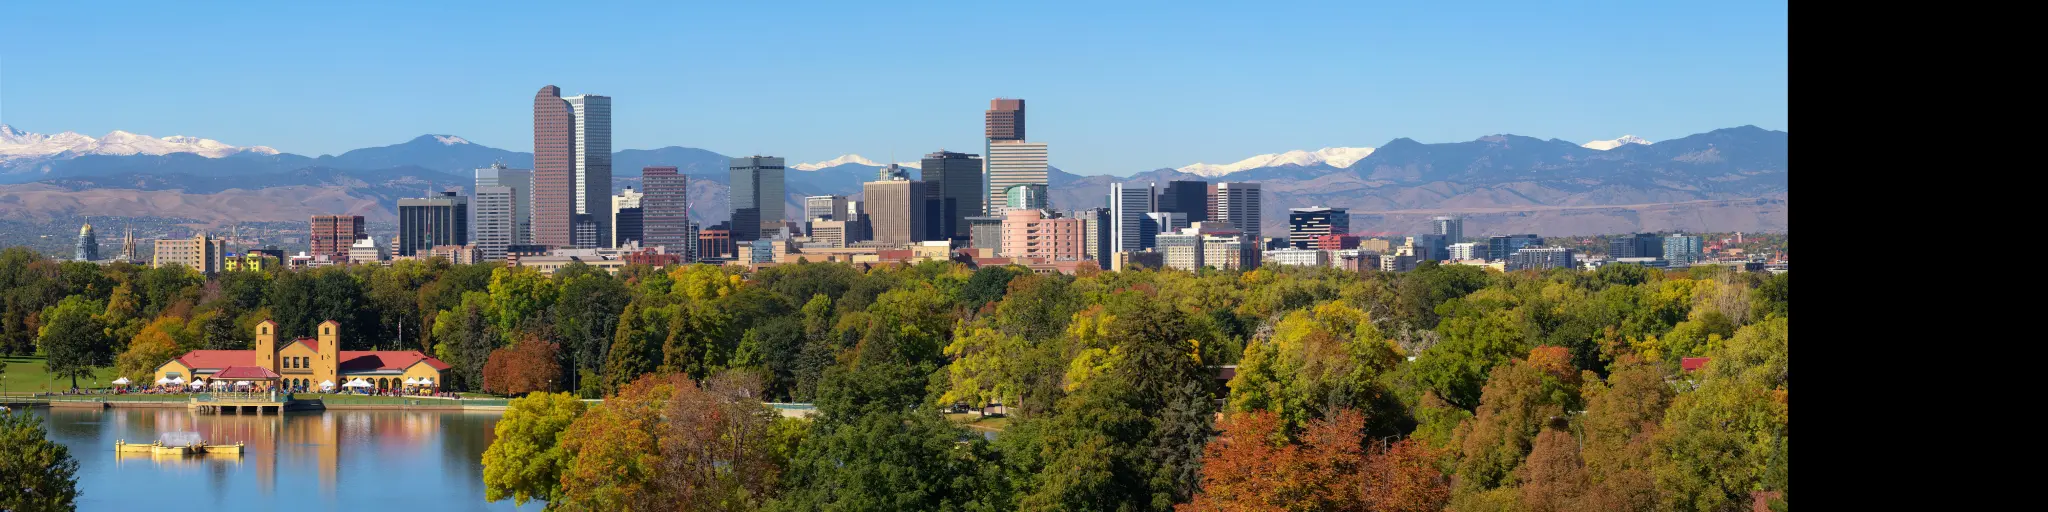 Denver city skyline with snow capped Rocky Mountains in the background